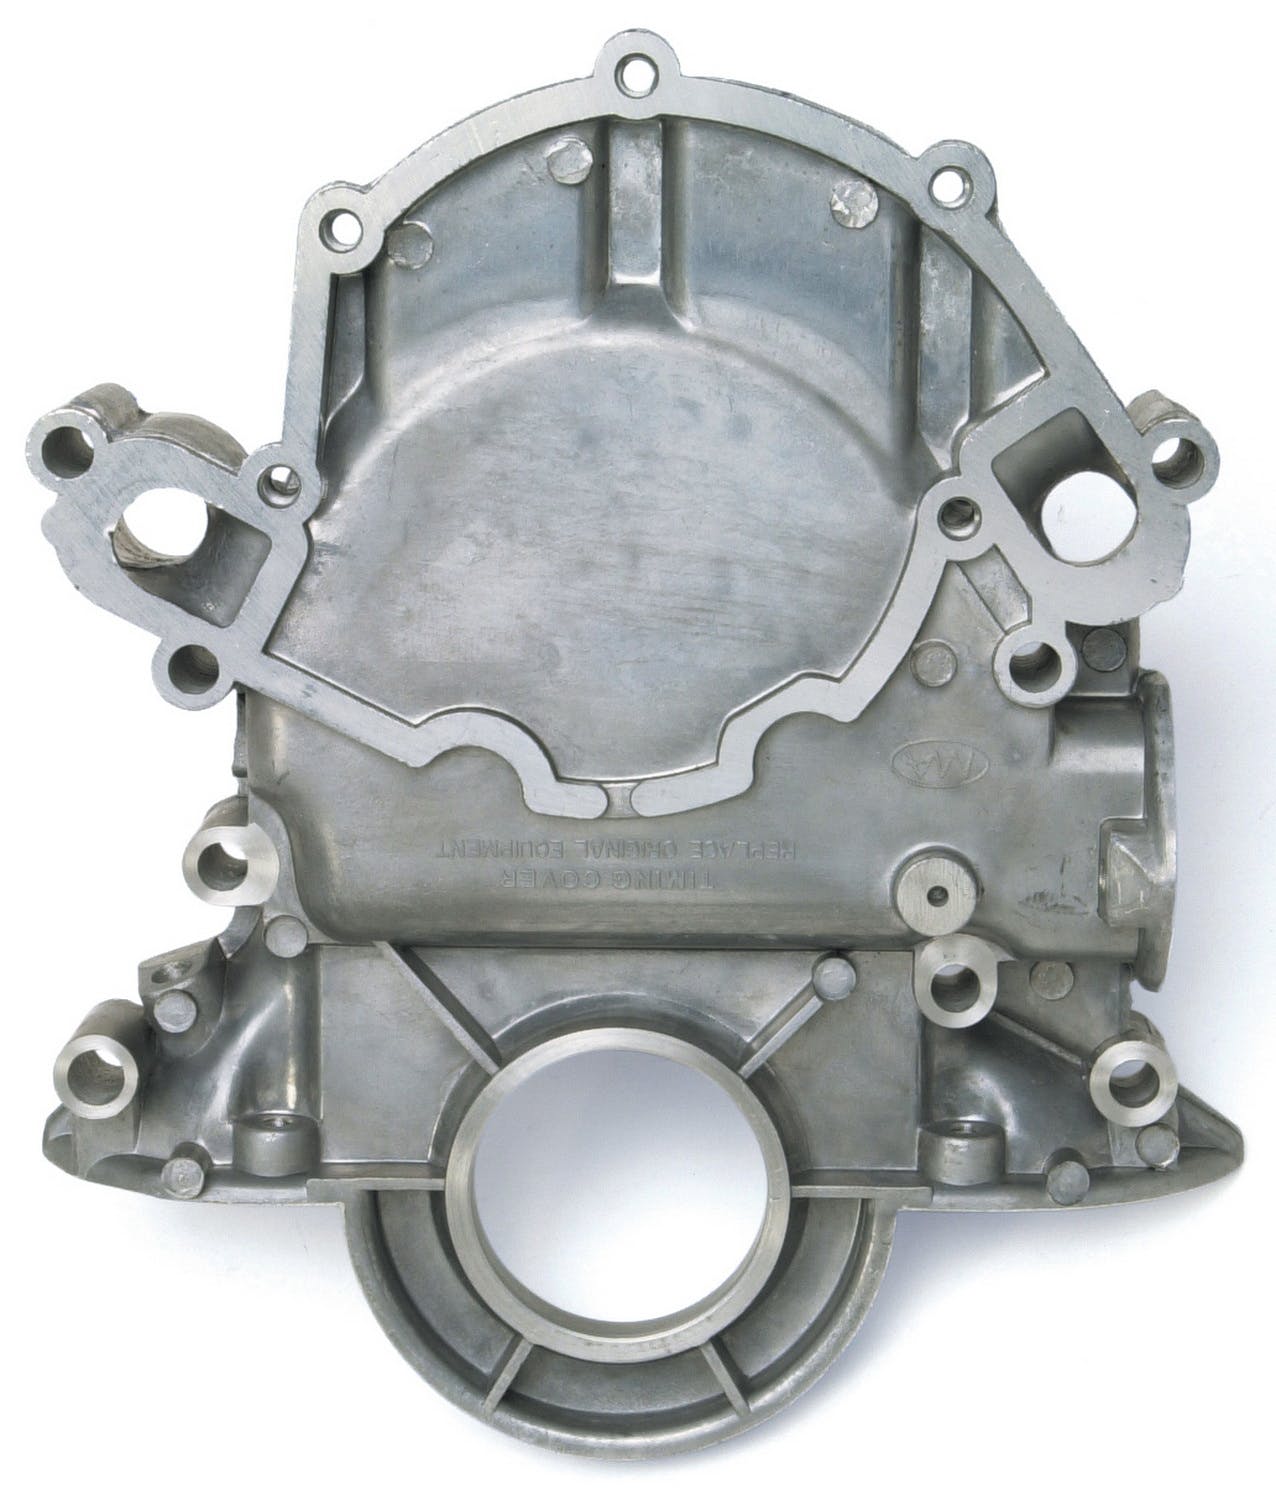 Edelbrock 4250 SBF TIMING COVER, 65-78 289(NON K-CODE) and 302 and 69-87 351W ENGINES